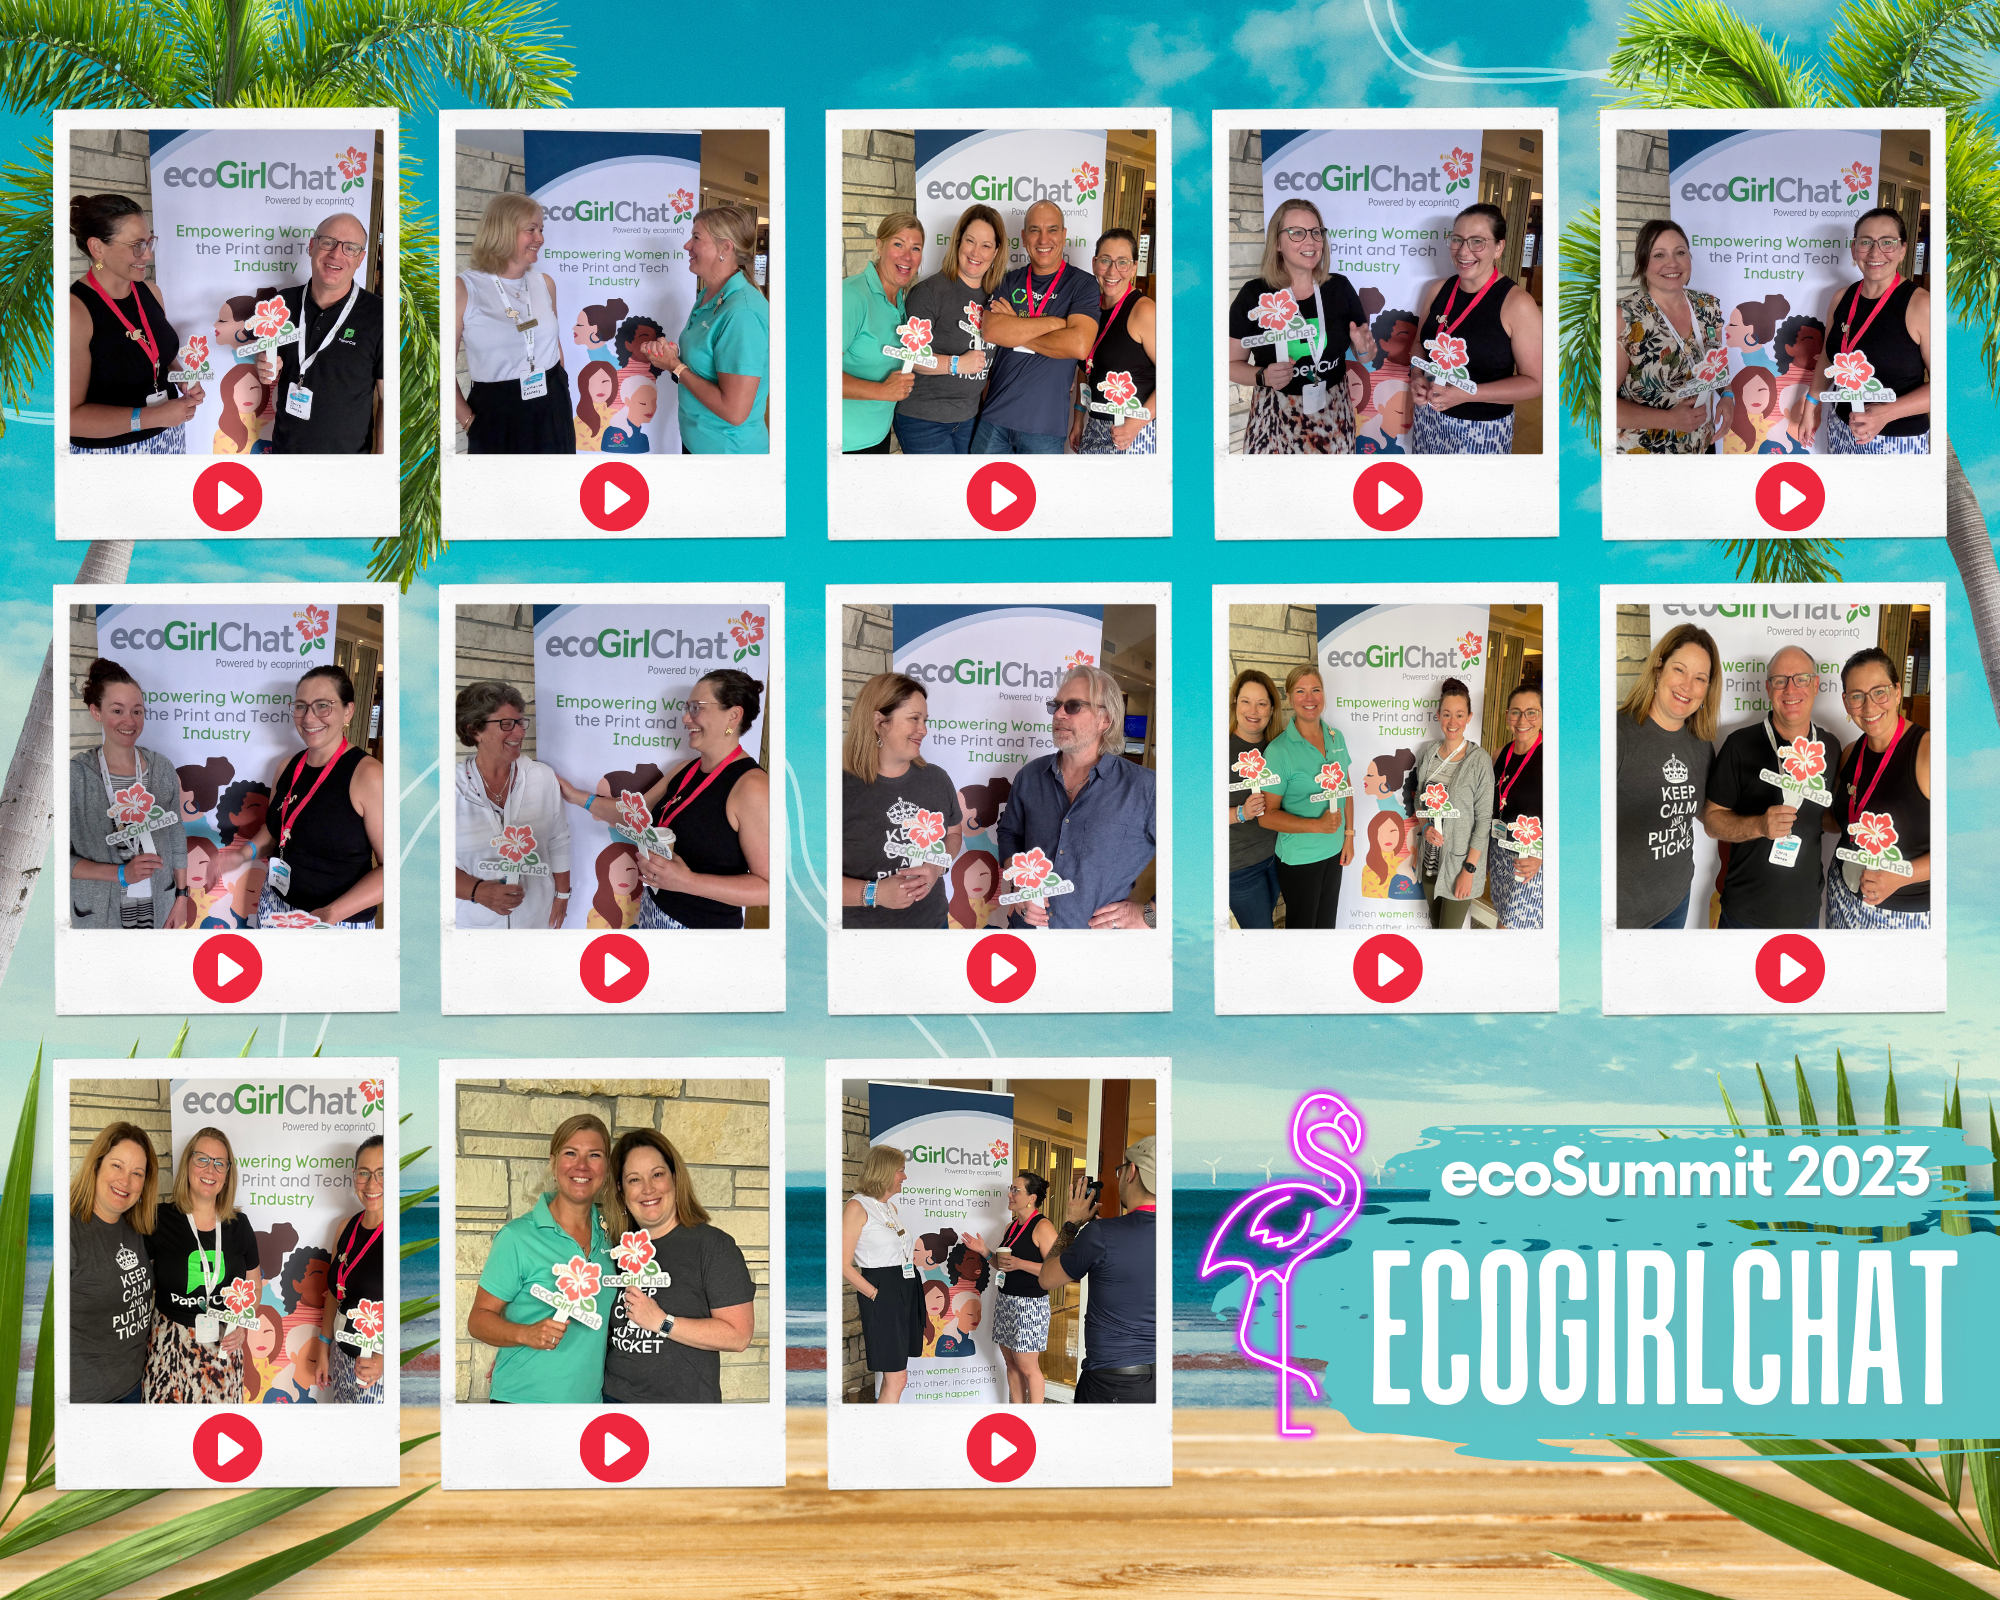 Empowering Women in the Print Management Industry: Insights from the ecoGirlChat Interview at ecoSummit 2023 in Beautiful Sarasota, Florida.